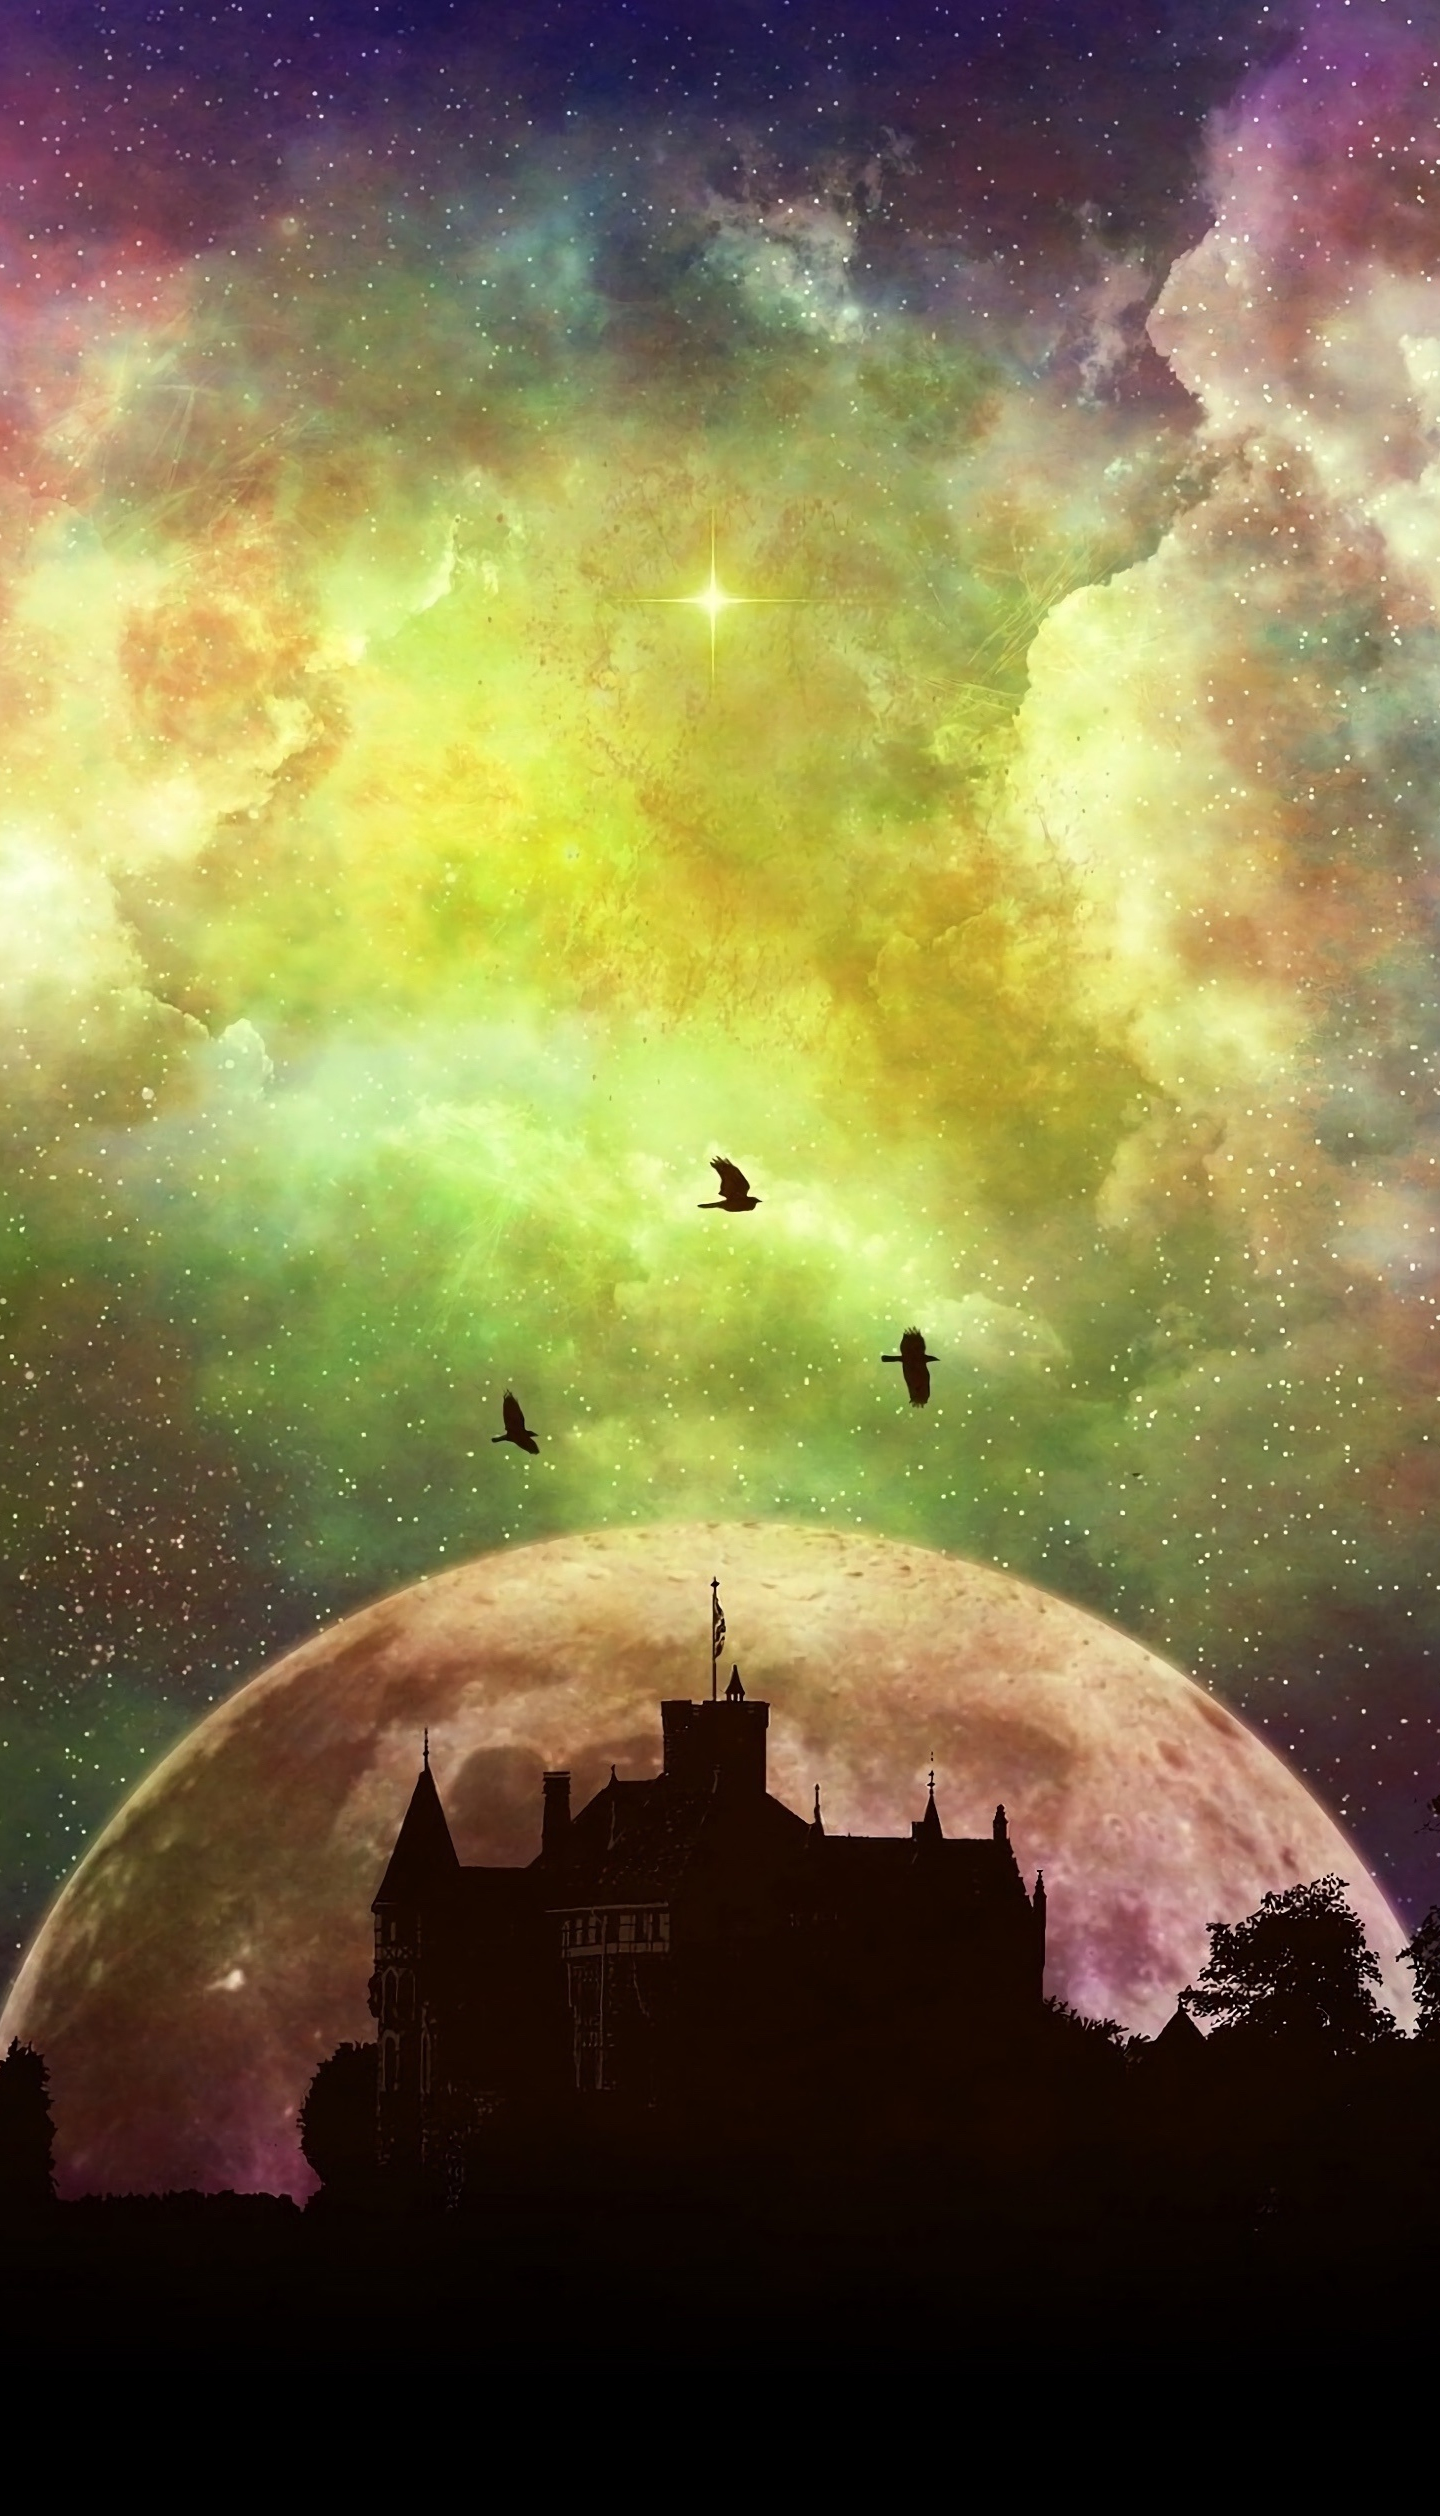 Download wallpaper 1440x2630 castle, moon, mystical, colorful sky, fantasy,  samsung galaxy note 8, 1440x2630 hd background, 8172